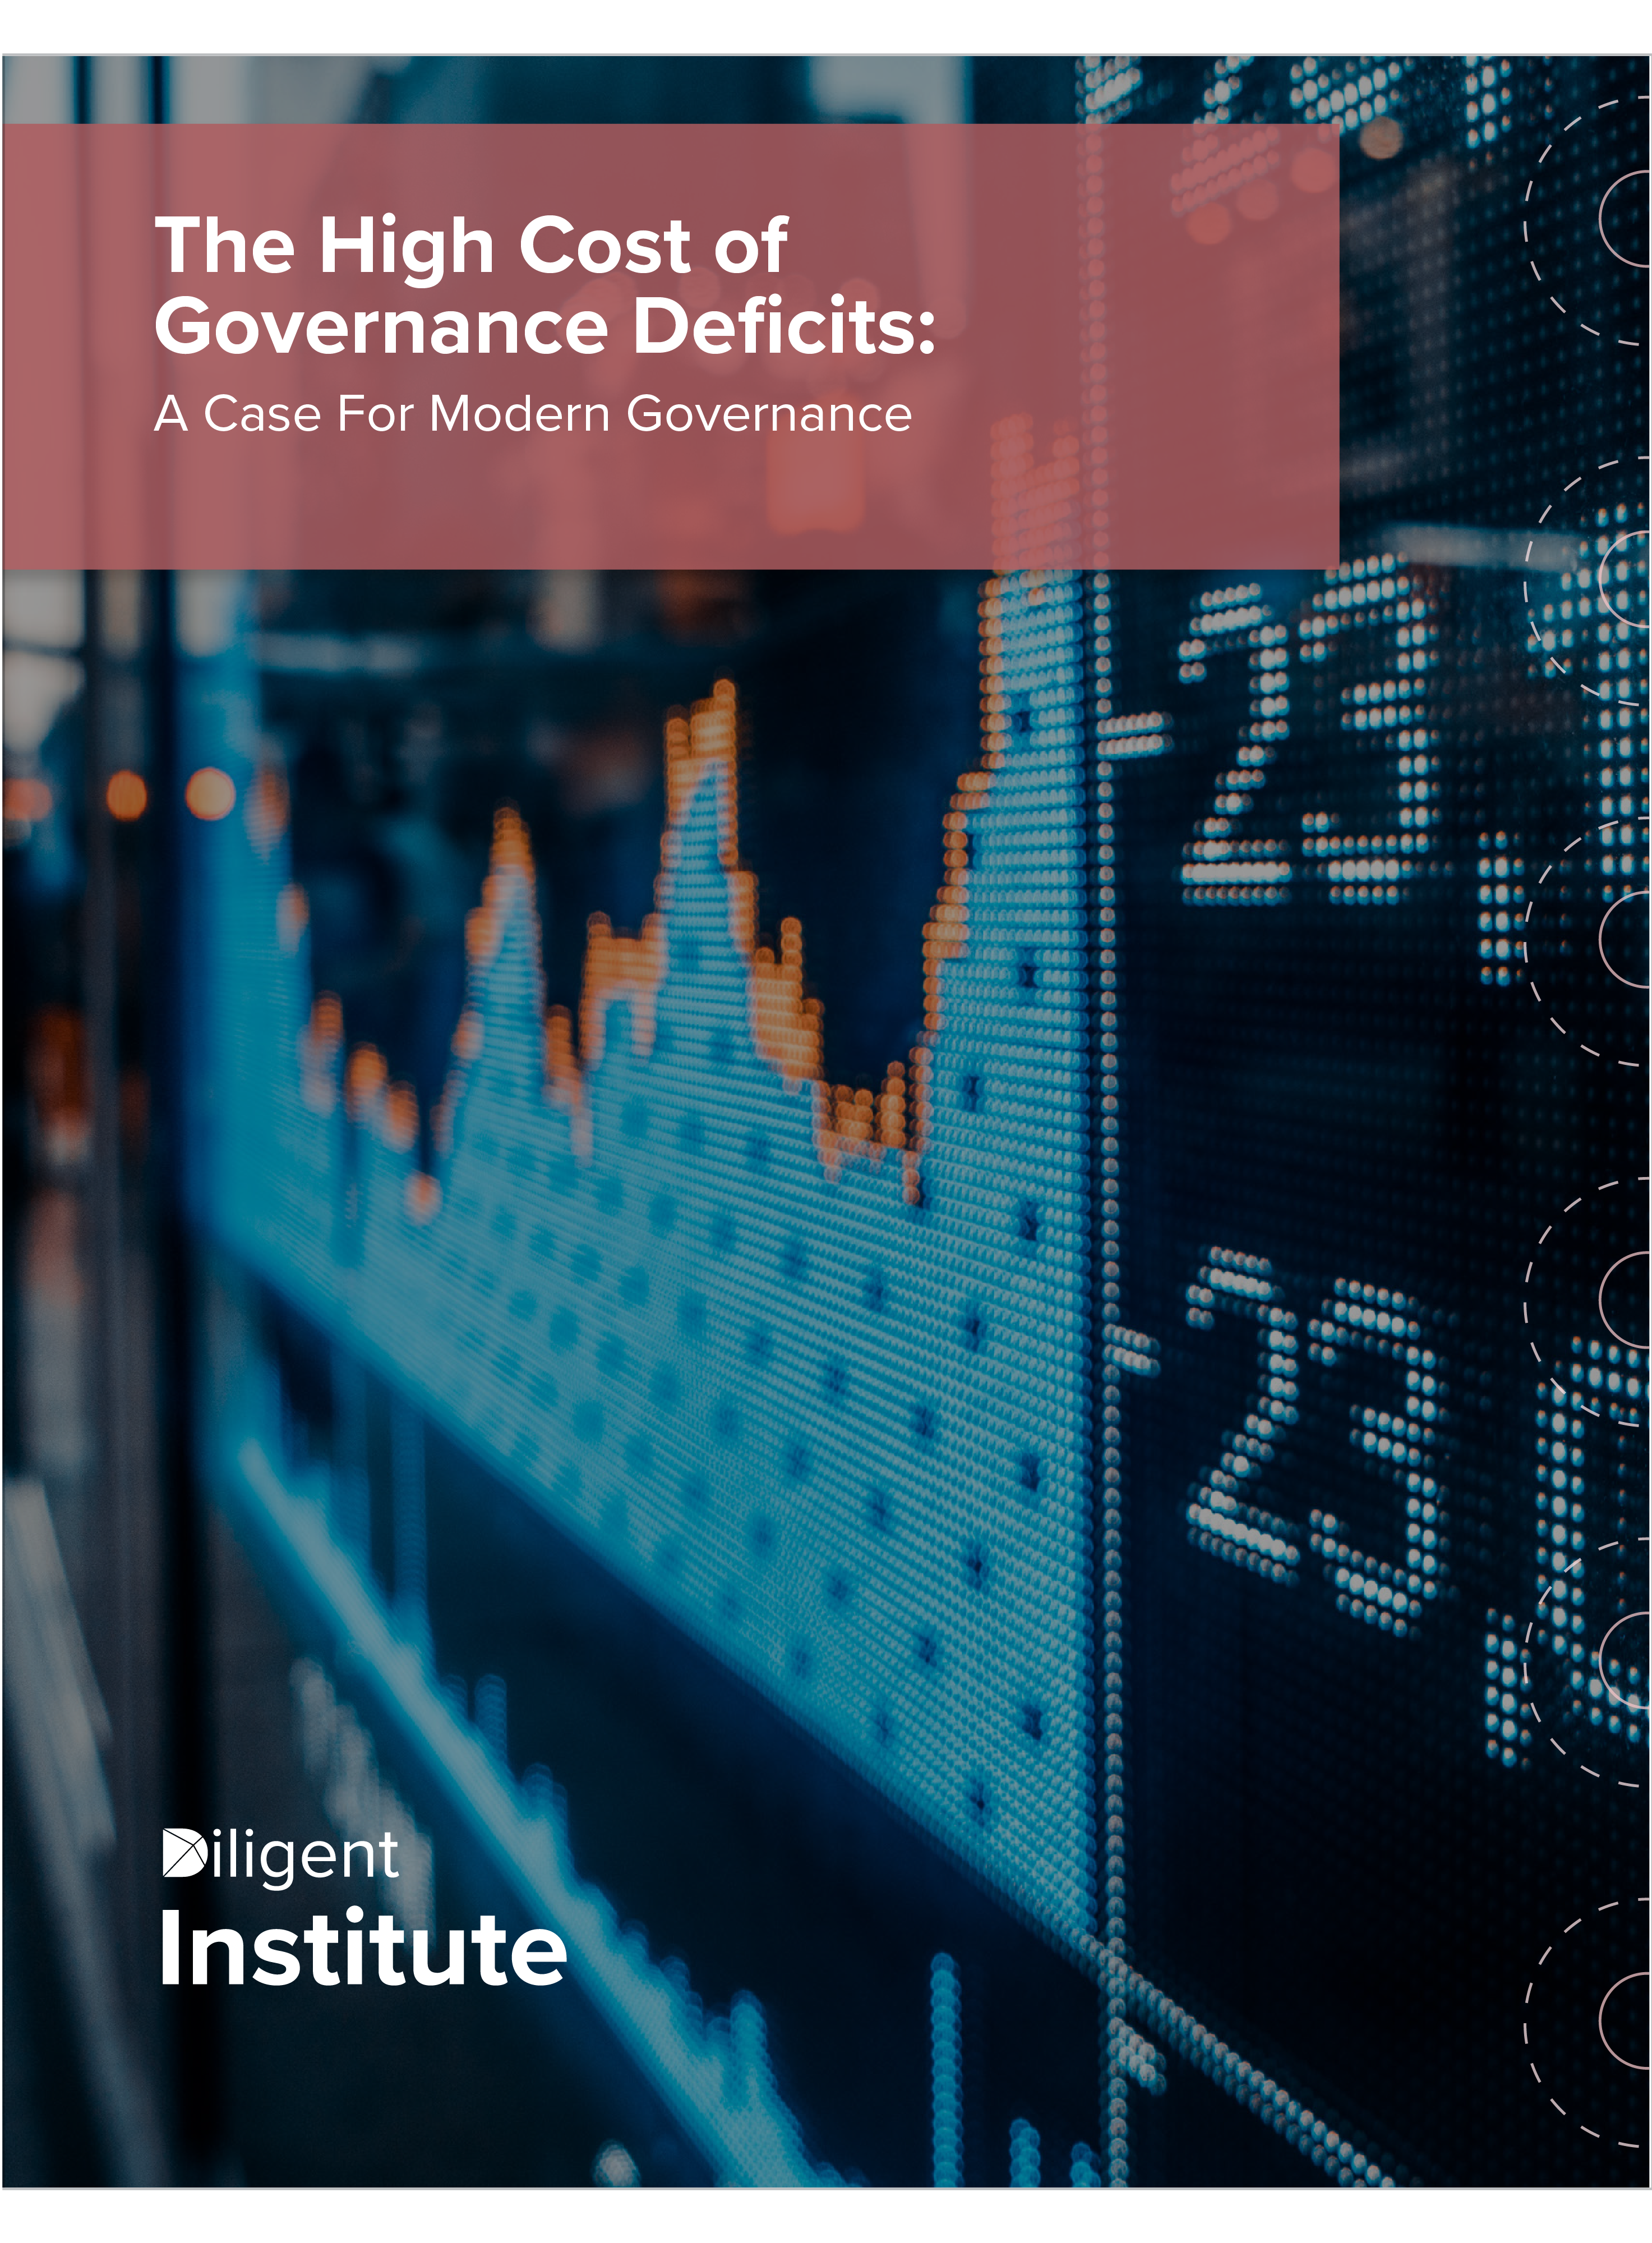 The High Cost of Governance Deficits: A Case for Modern Governance report